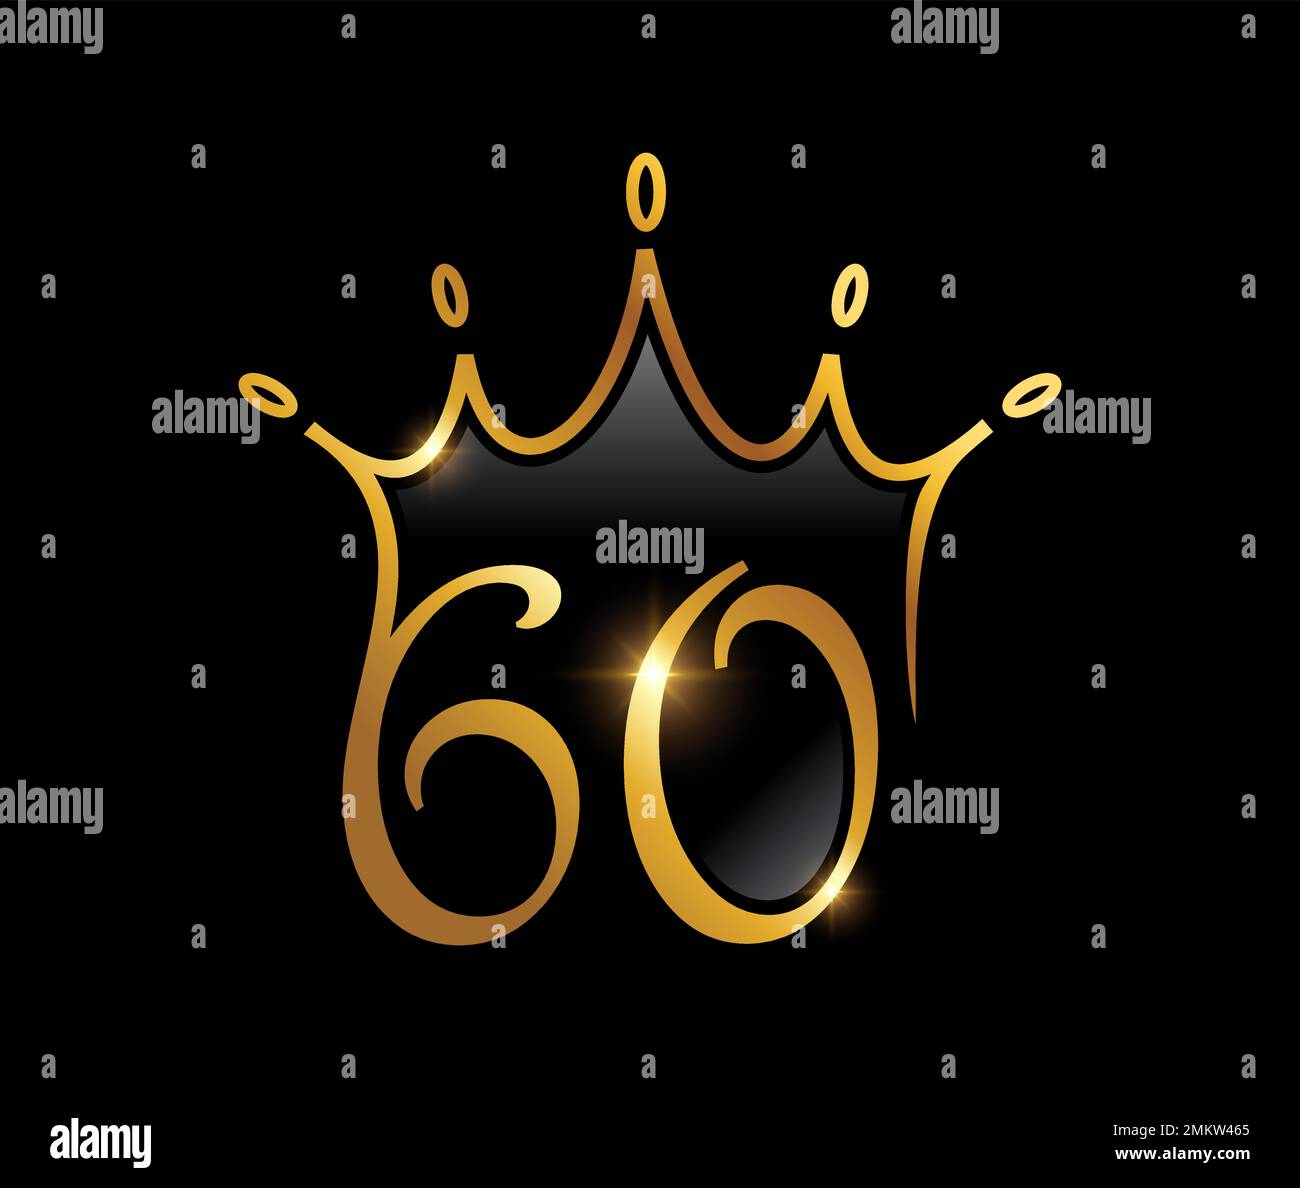 Golden number 60 Stock Vector Images - Alamy